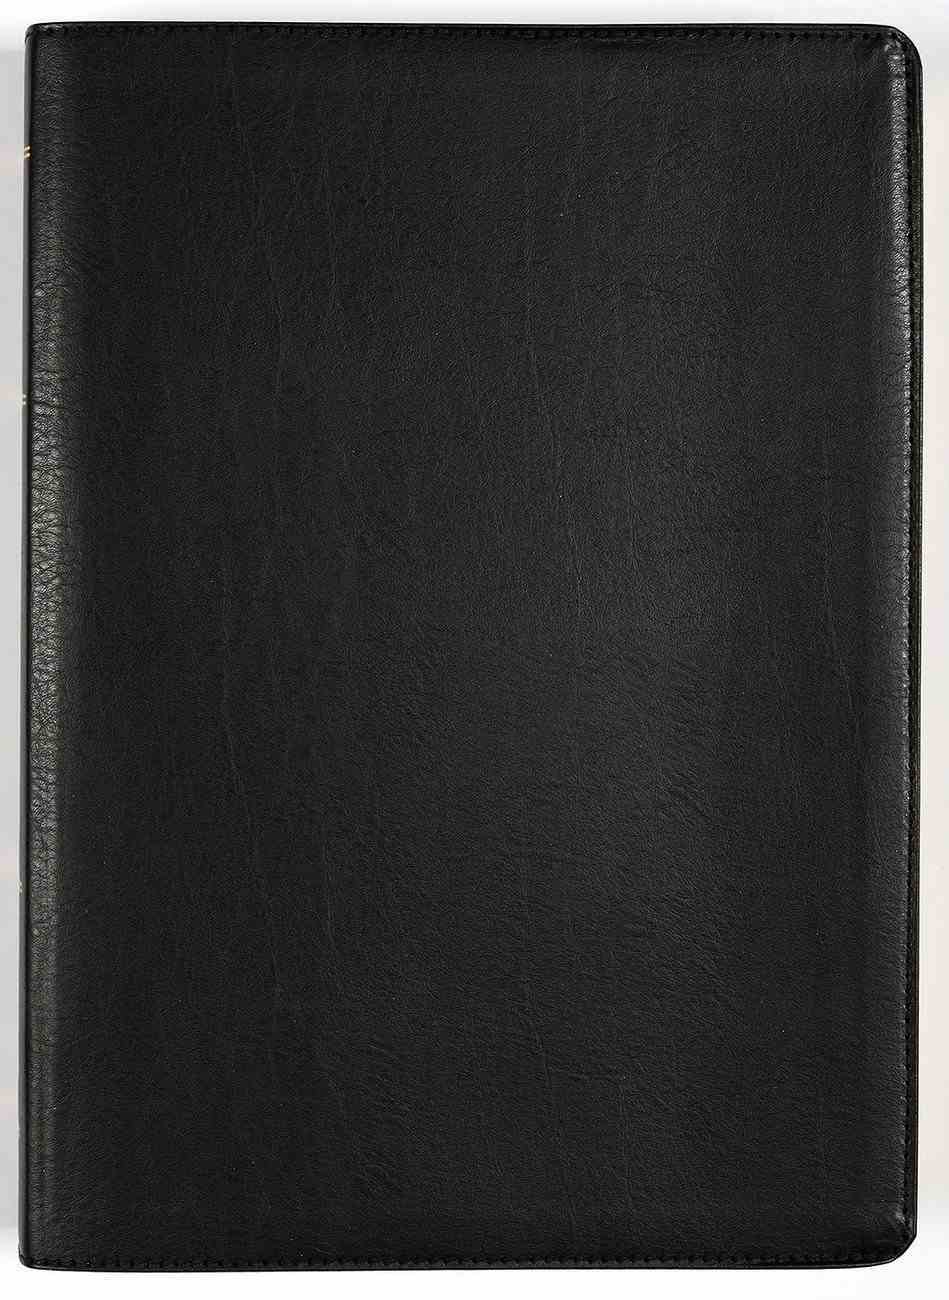 KJV Thompson Chain-Reference Bible Large Print Black (Red Letter Edition) Bonded Leather